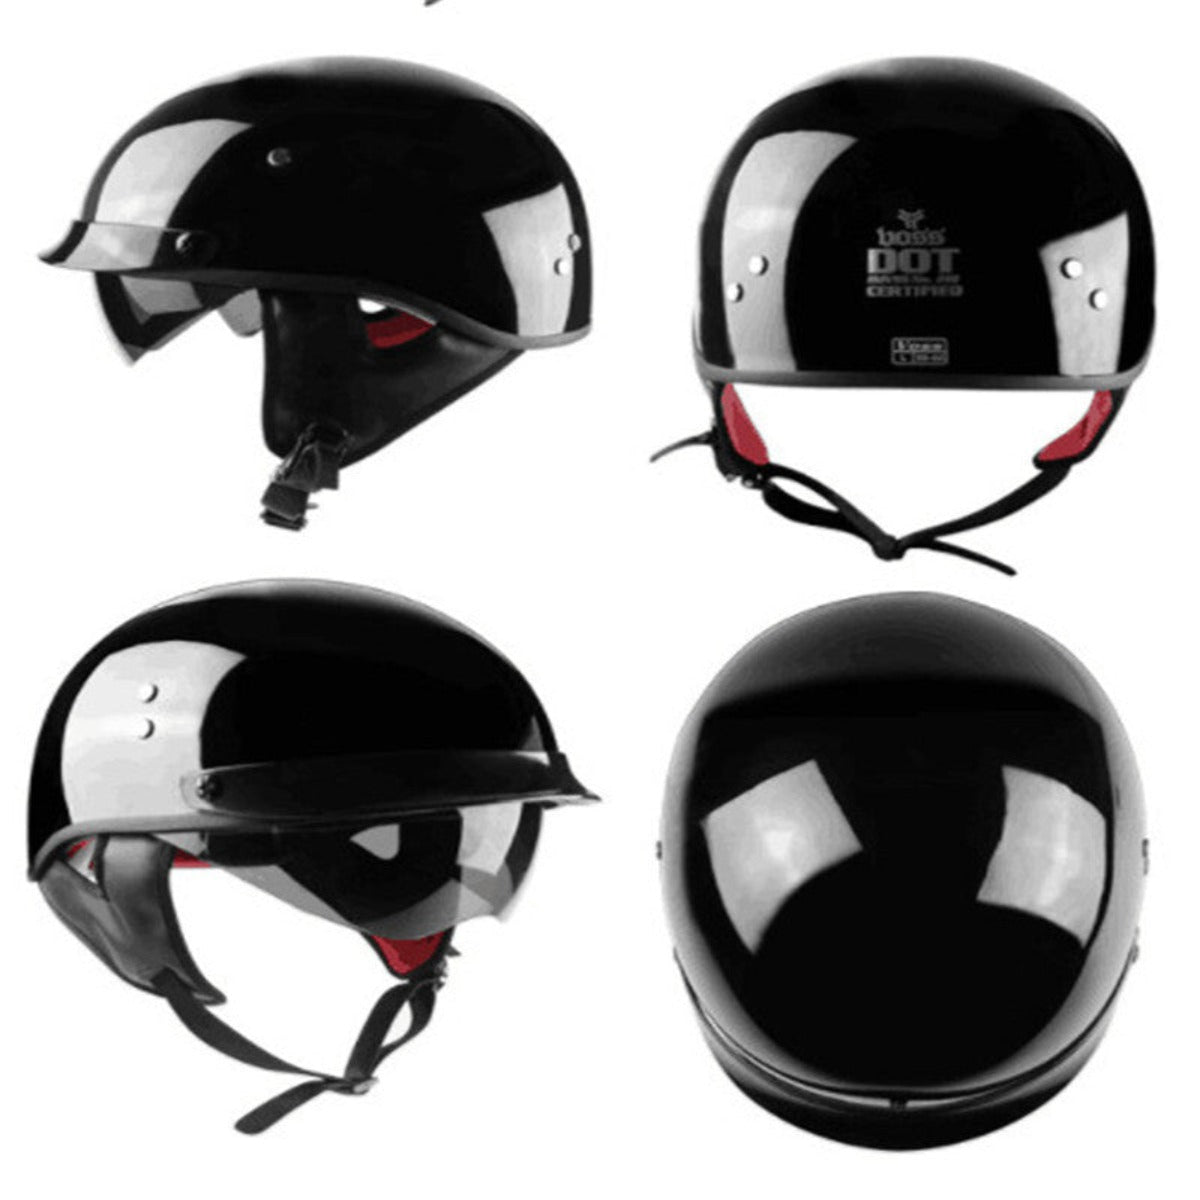 A collection of stylish black D.O.T Certified Vintage Half Face Biker Helmets, showcased against a clean white background.